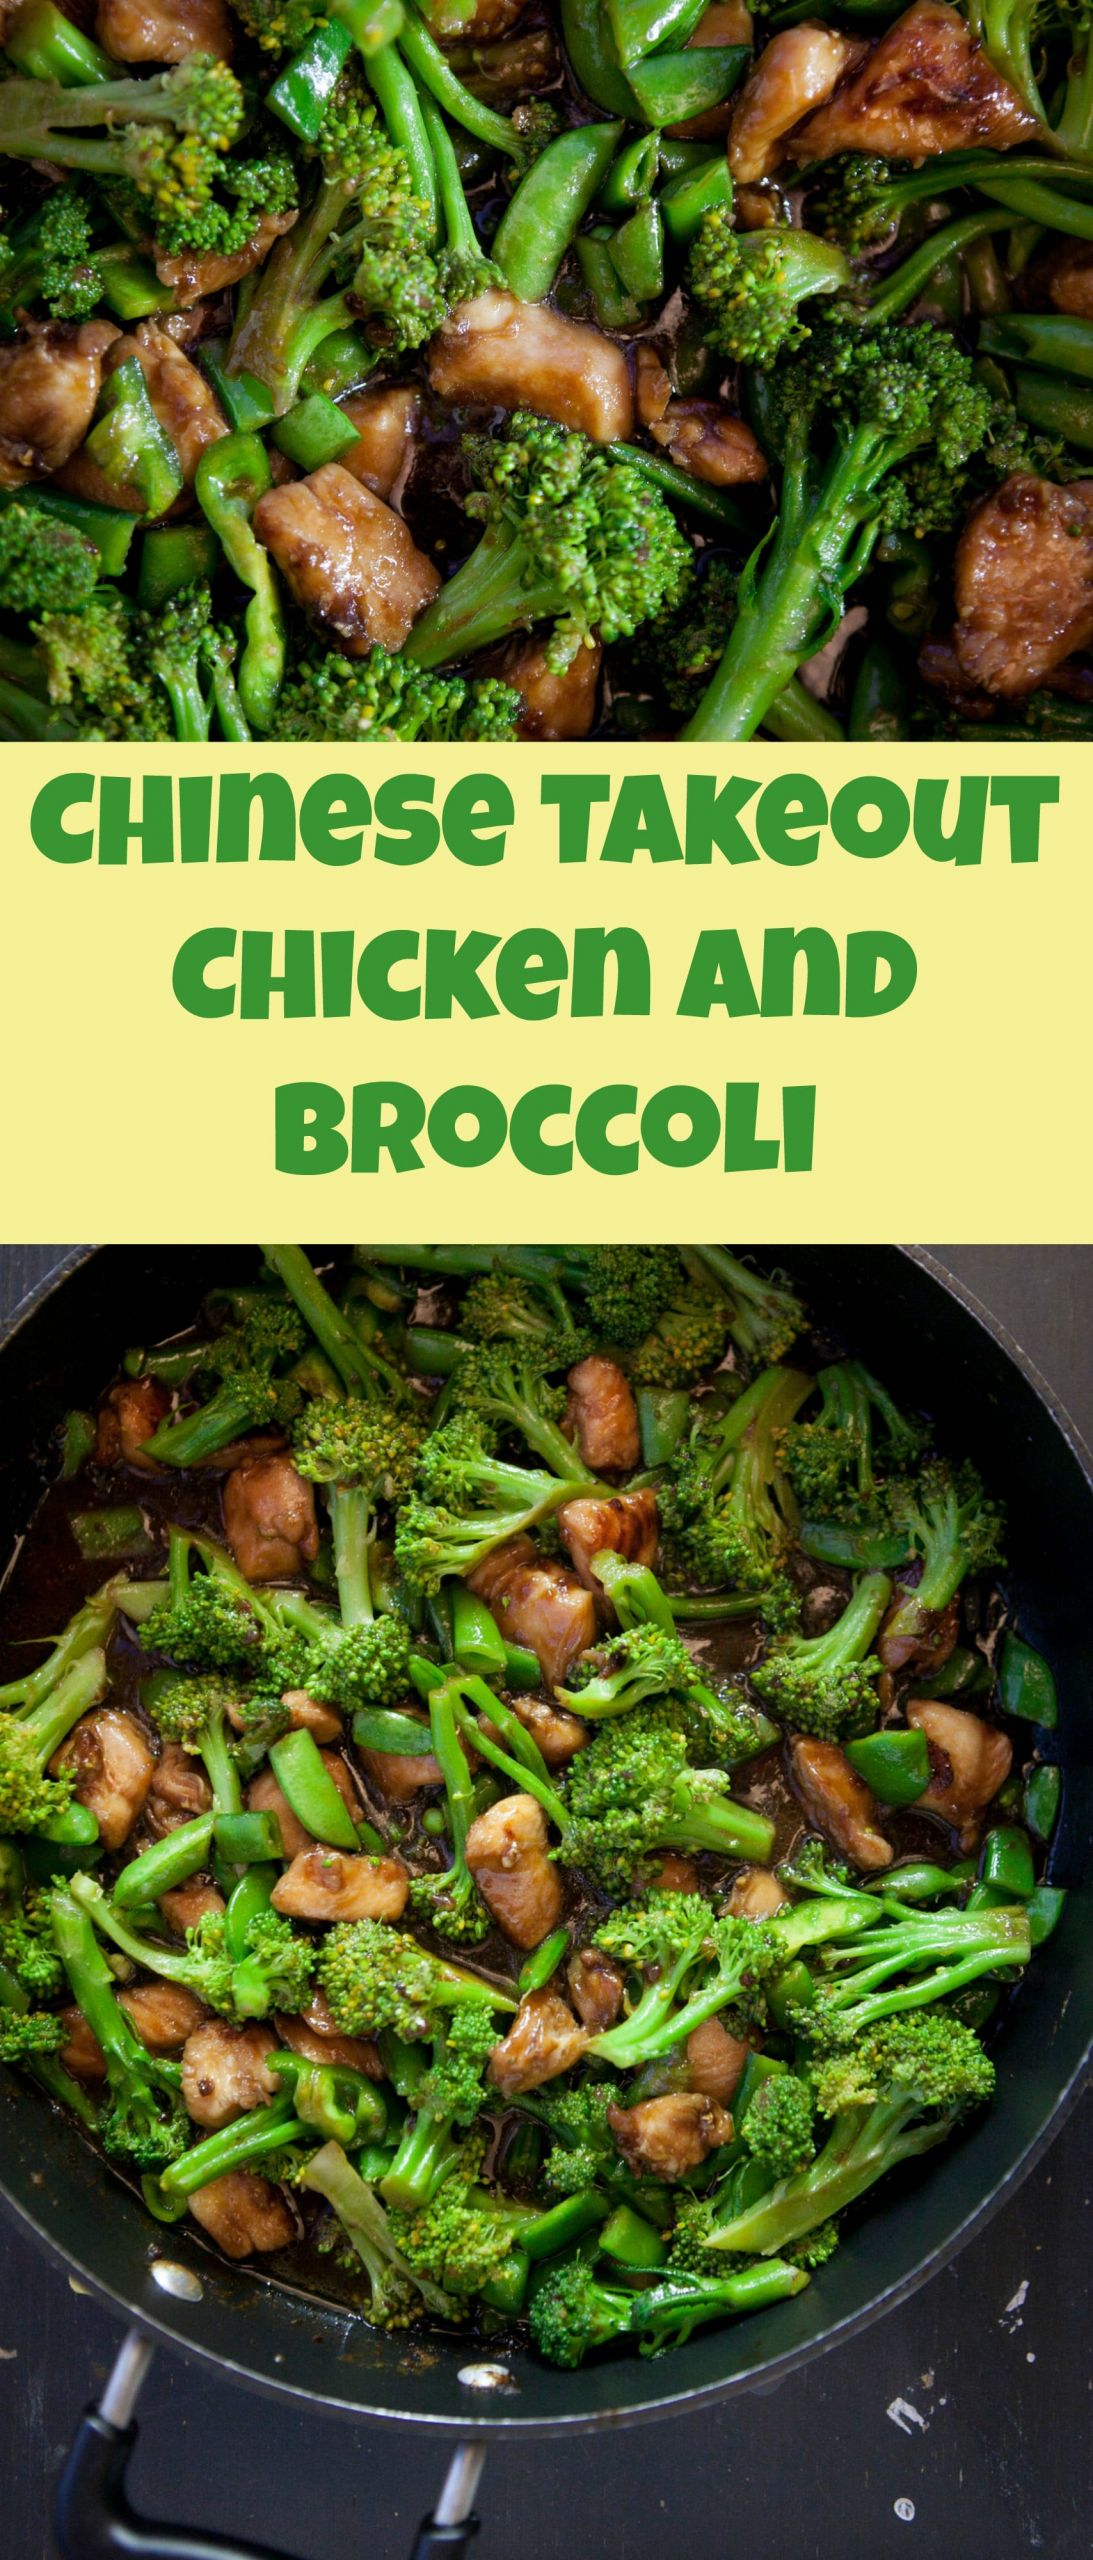 Chinese Chicken And Broccoli Recipes
 Chinese Takeout Chicken and Broccoli Brooklyn Farm Girl